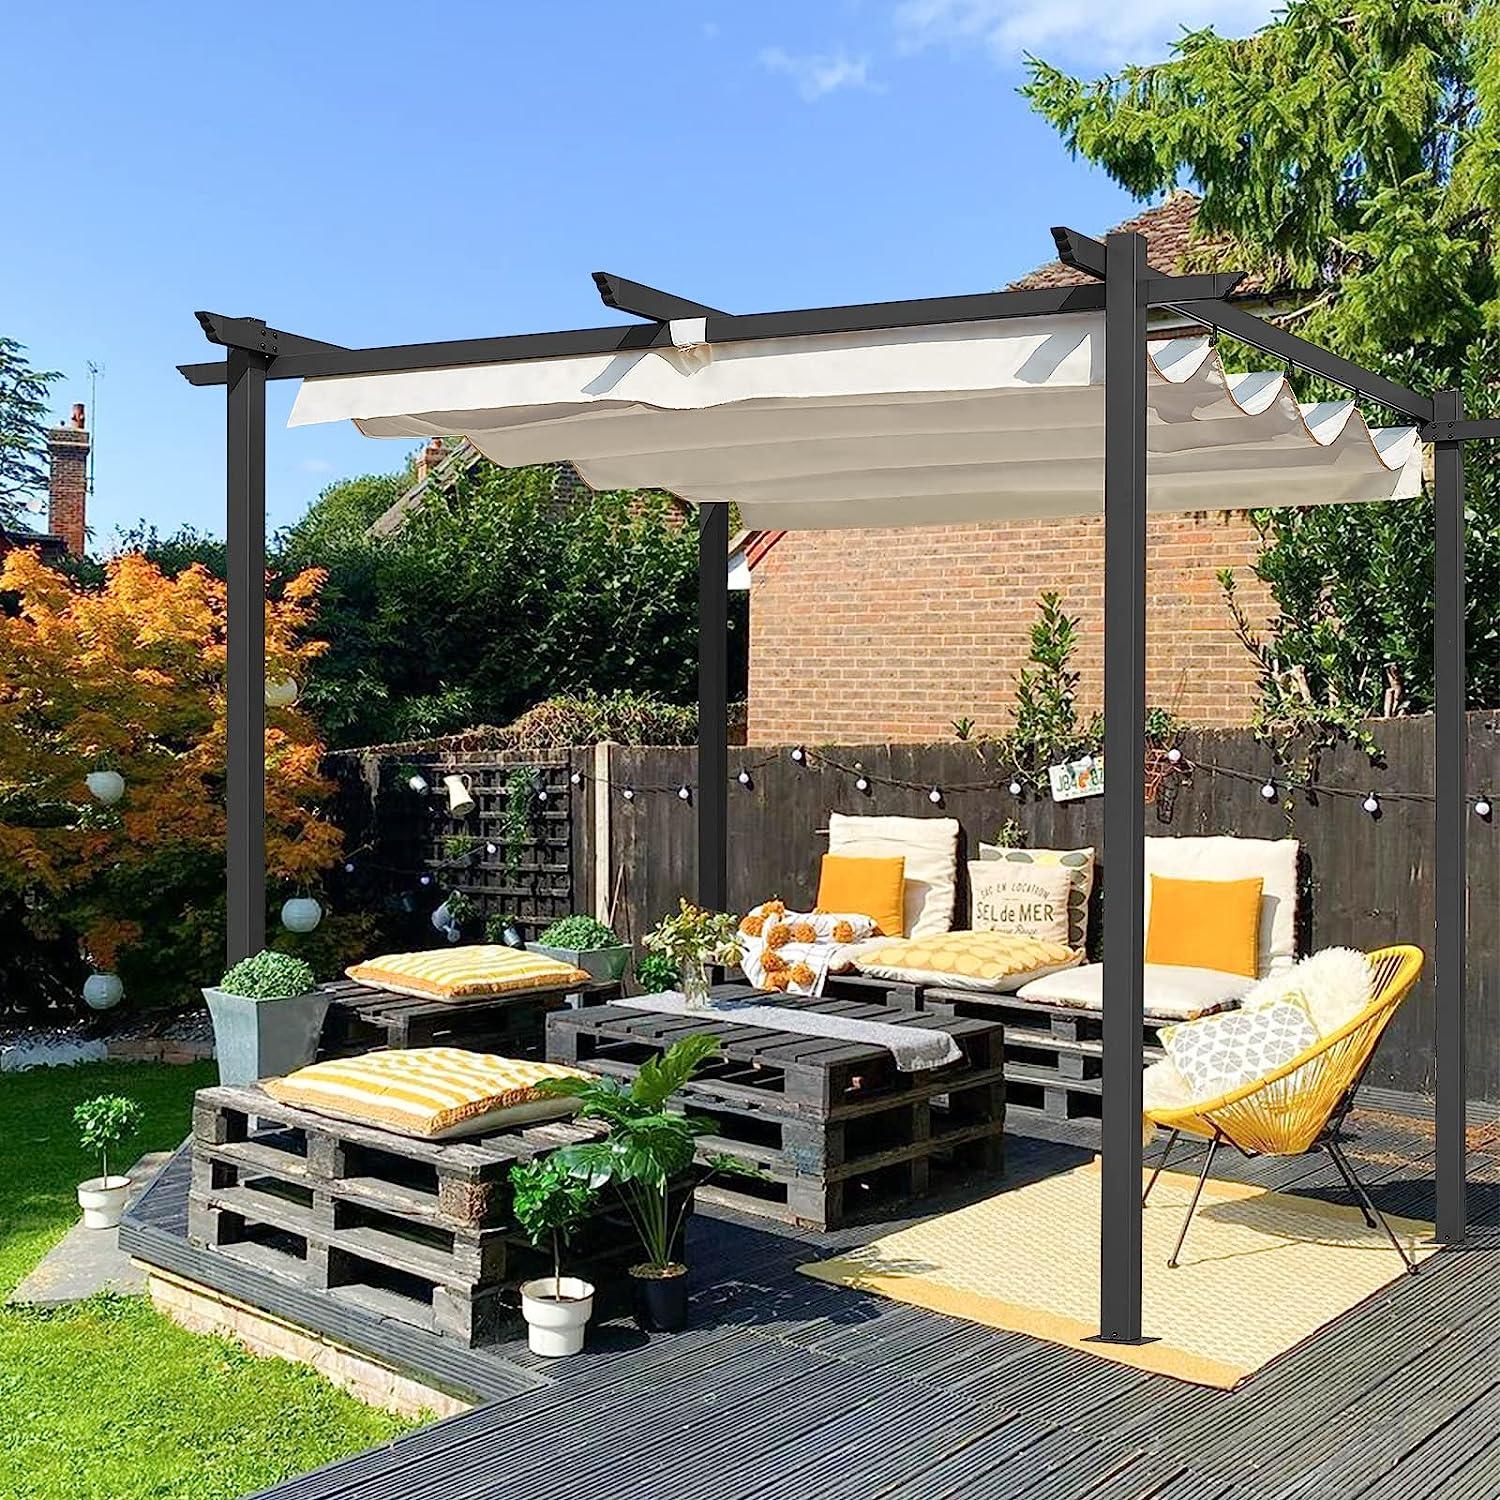 LazyRella™ 10x10ft Extra-Large Outdoor Pergola, Patio Shelter w/Retractable Sun Shade Canopy Cover, Weather-Resistant Fabric - Lazy Pro